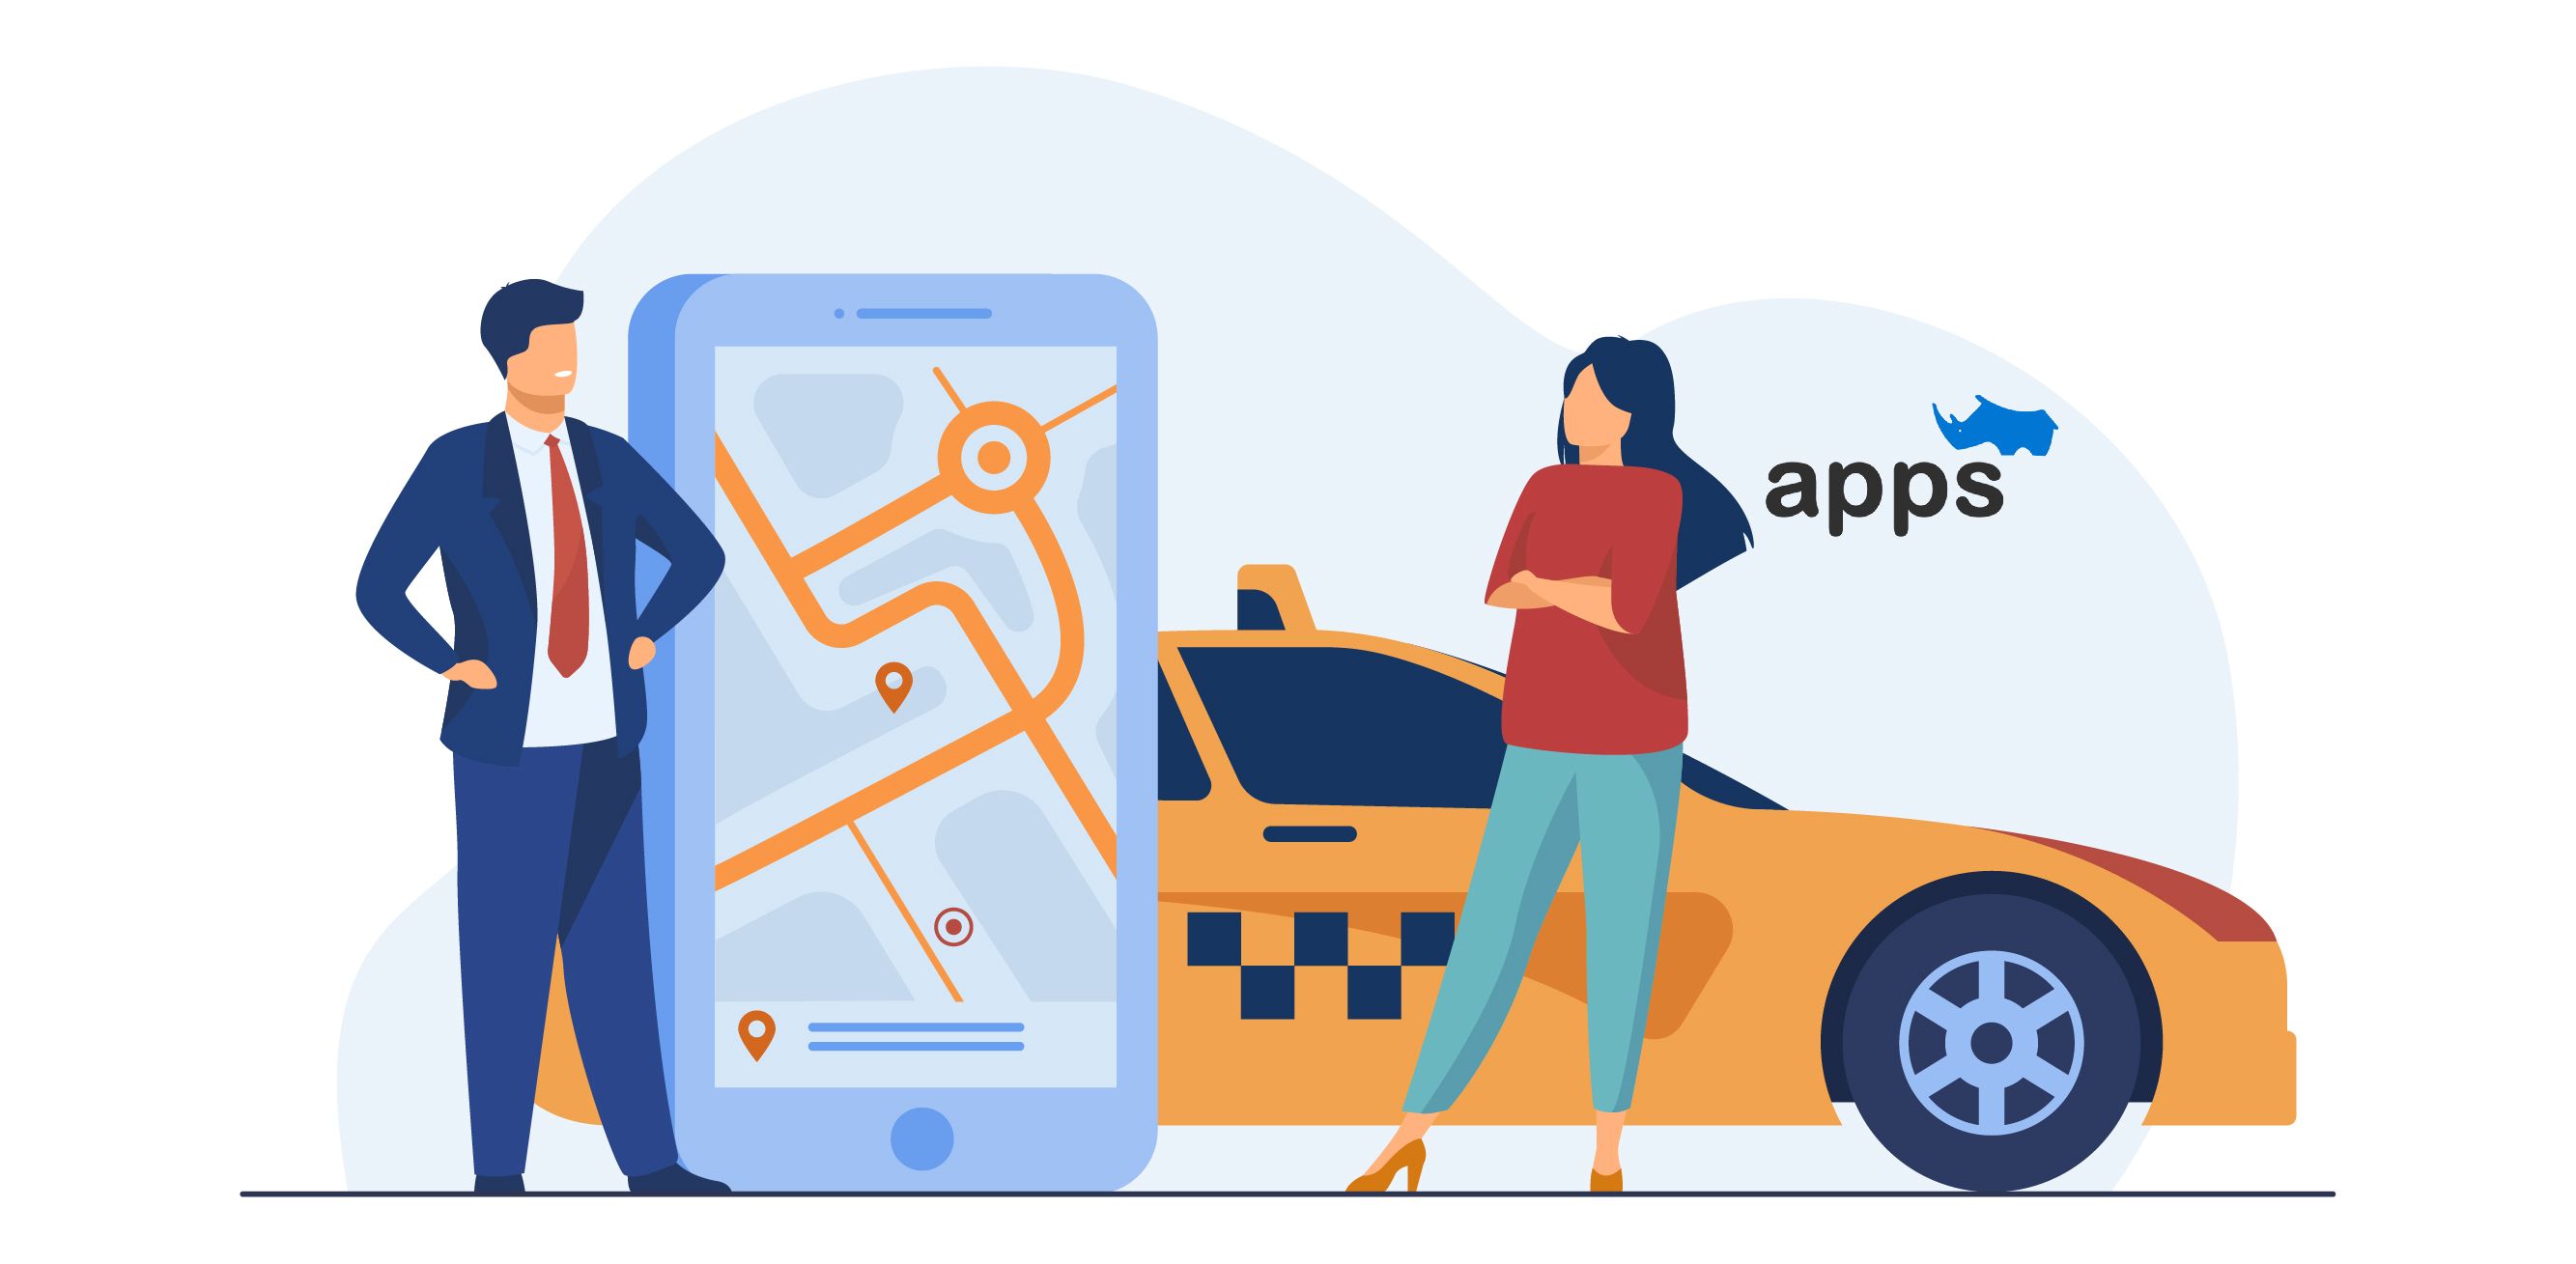 Expert advice from AppsRhino on overcoming obstacles to creating a taxi app